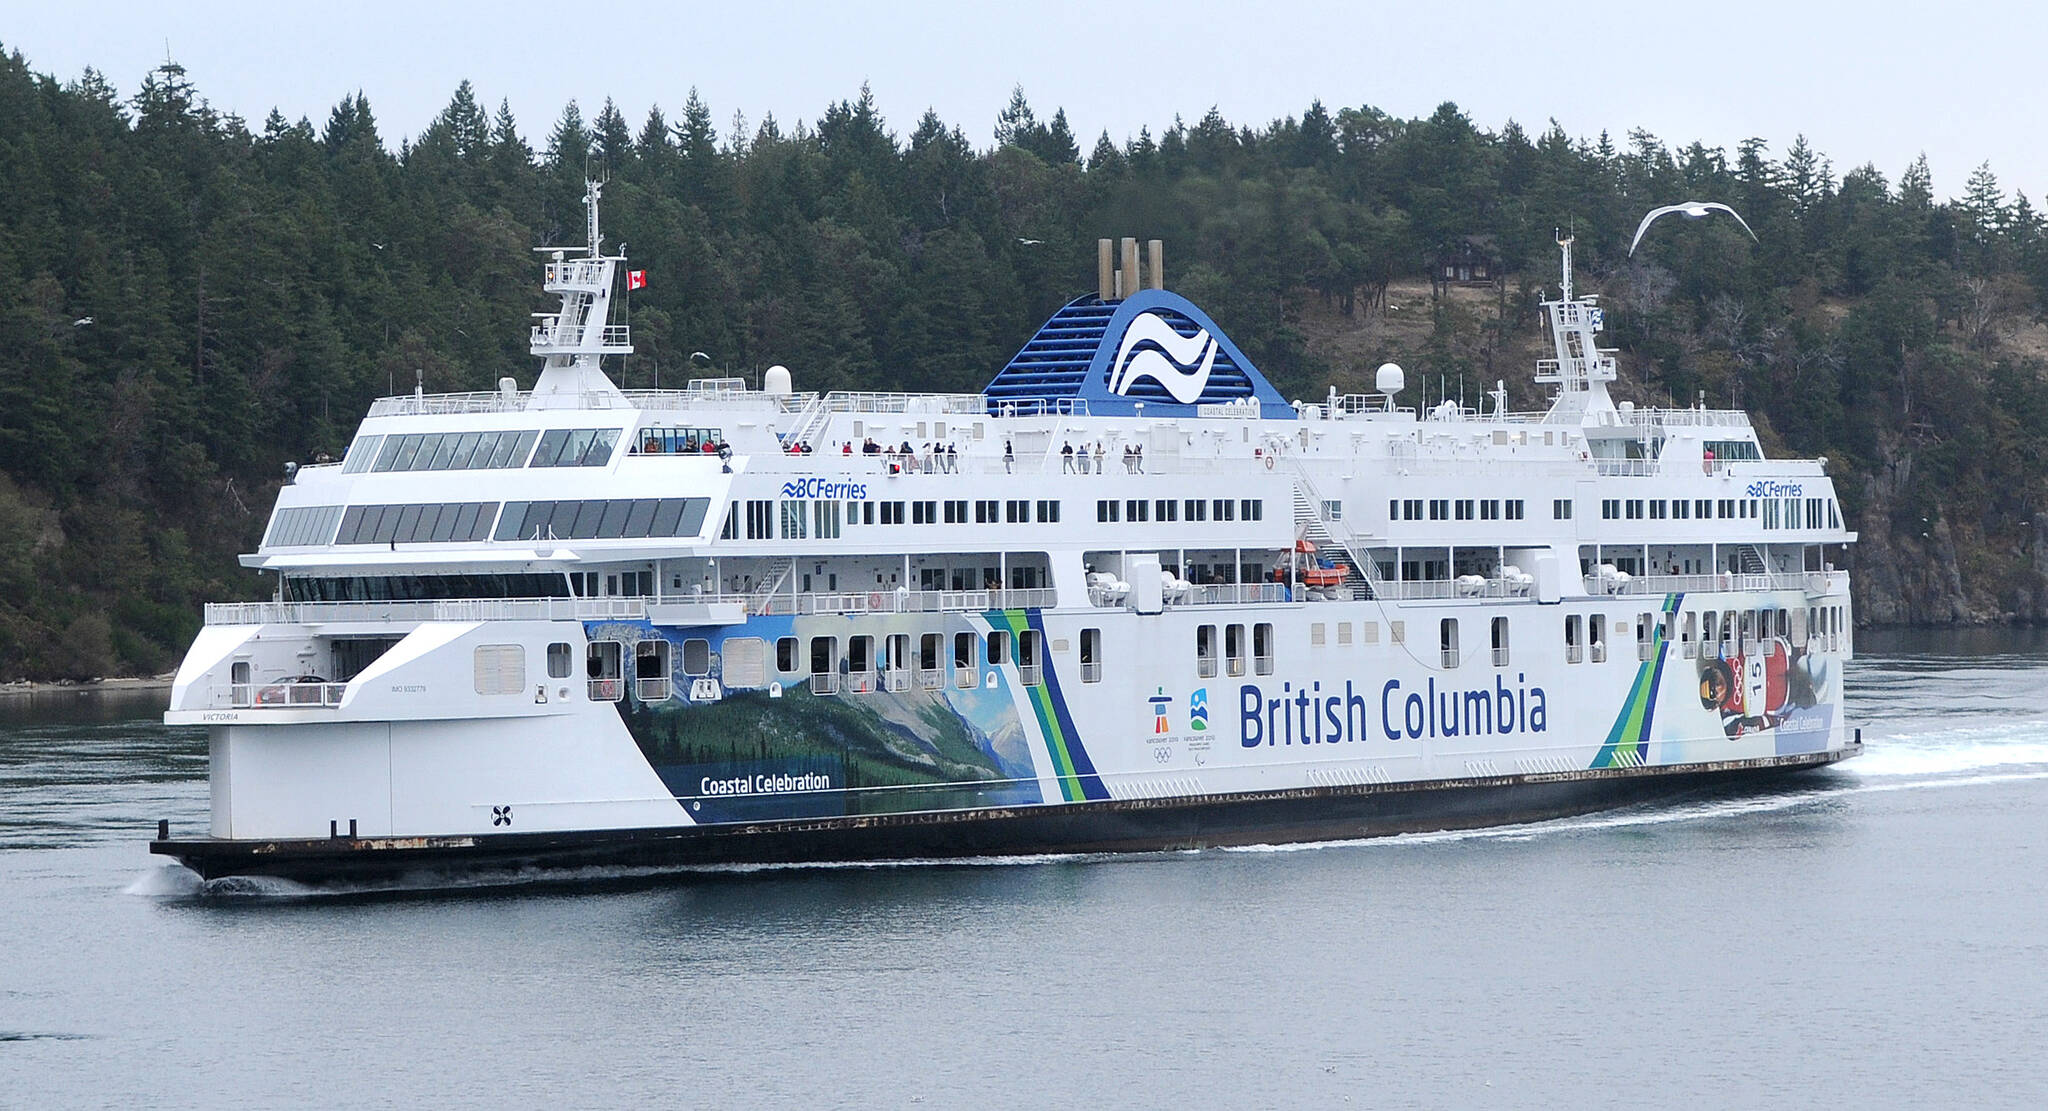 High winds are forecast to subside by Friday afternoon, but until then BC Ferries is keeping many vessels docked. (Black Press Media file photo)